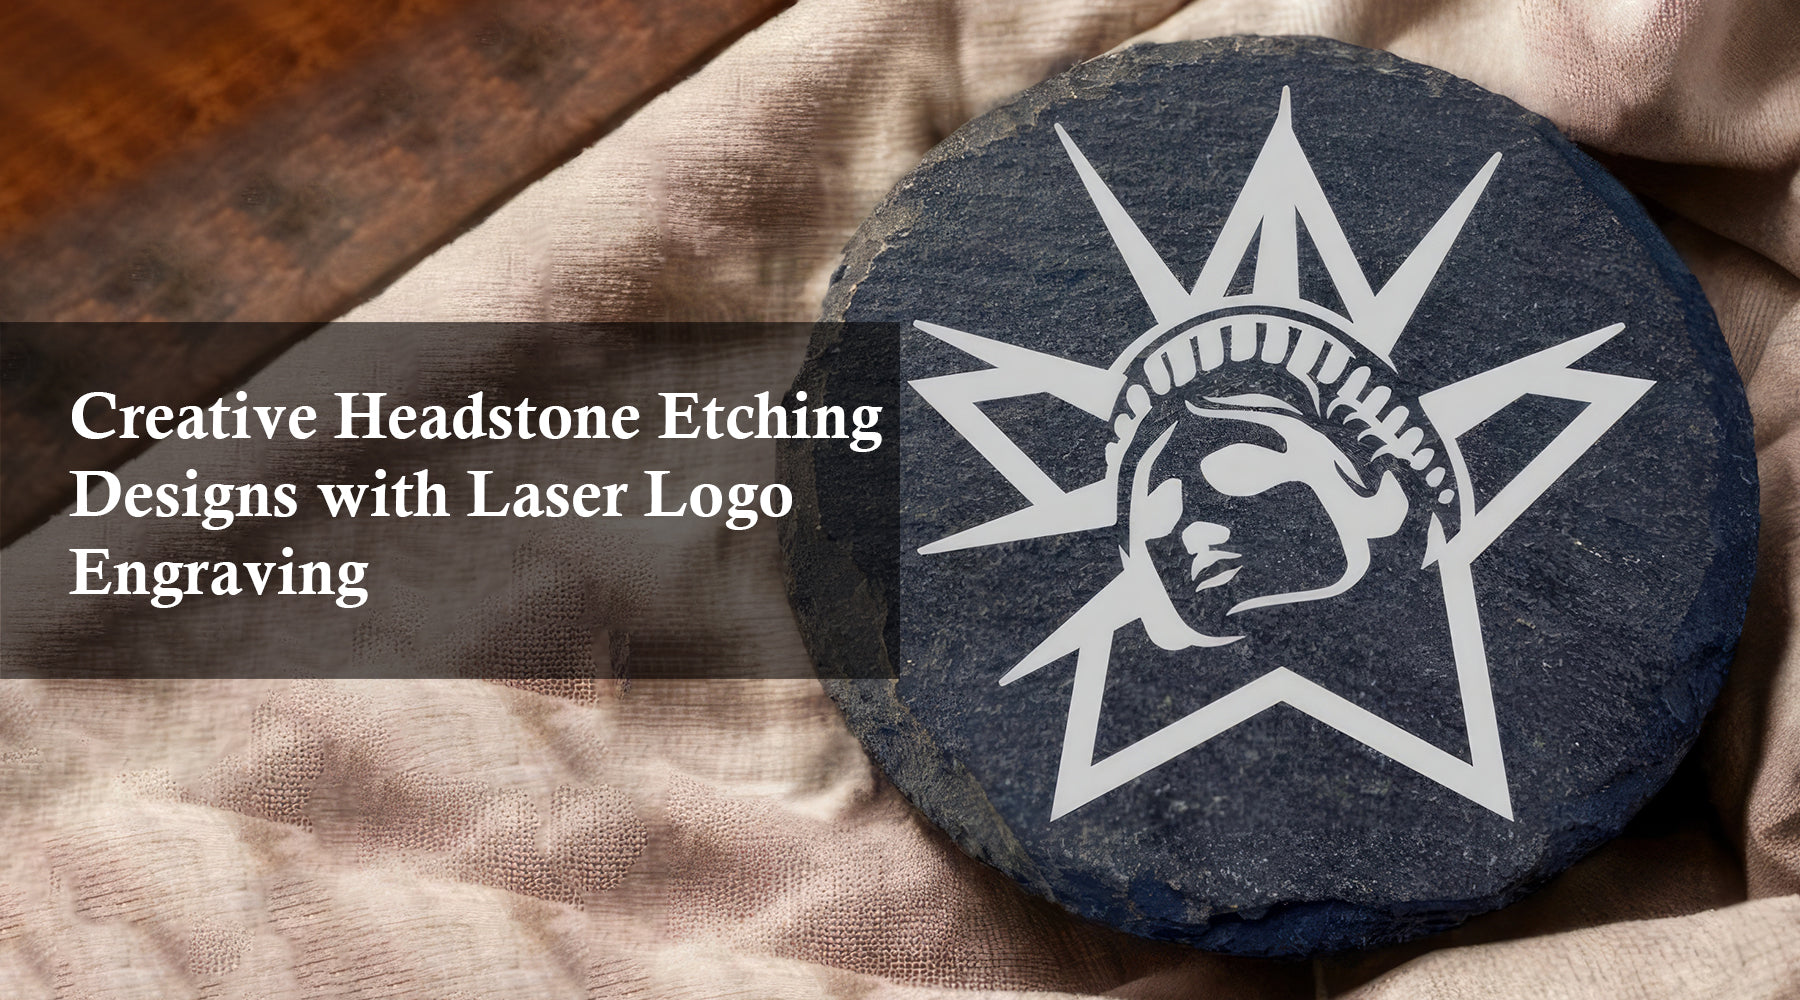 Creative Headstone Etching Designs with Laser Logo Engraving